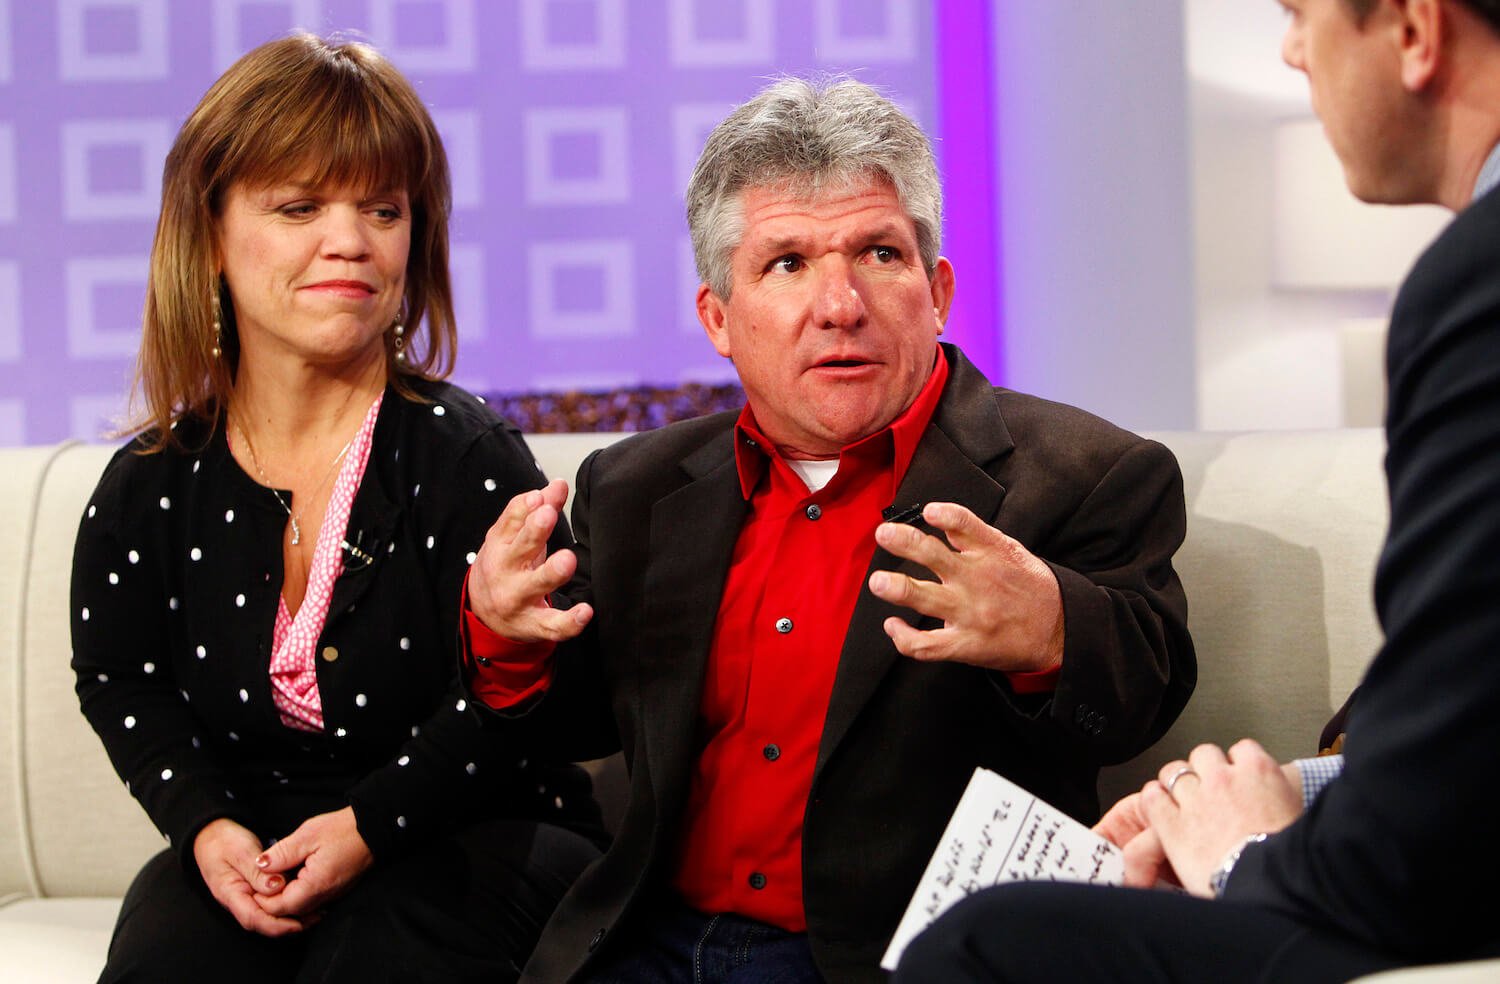 Matt and Amy Roloff, the owners of Roloff Farms from 'Little People, Big World' sitting next to each other during an interview